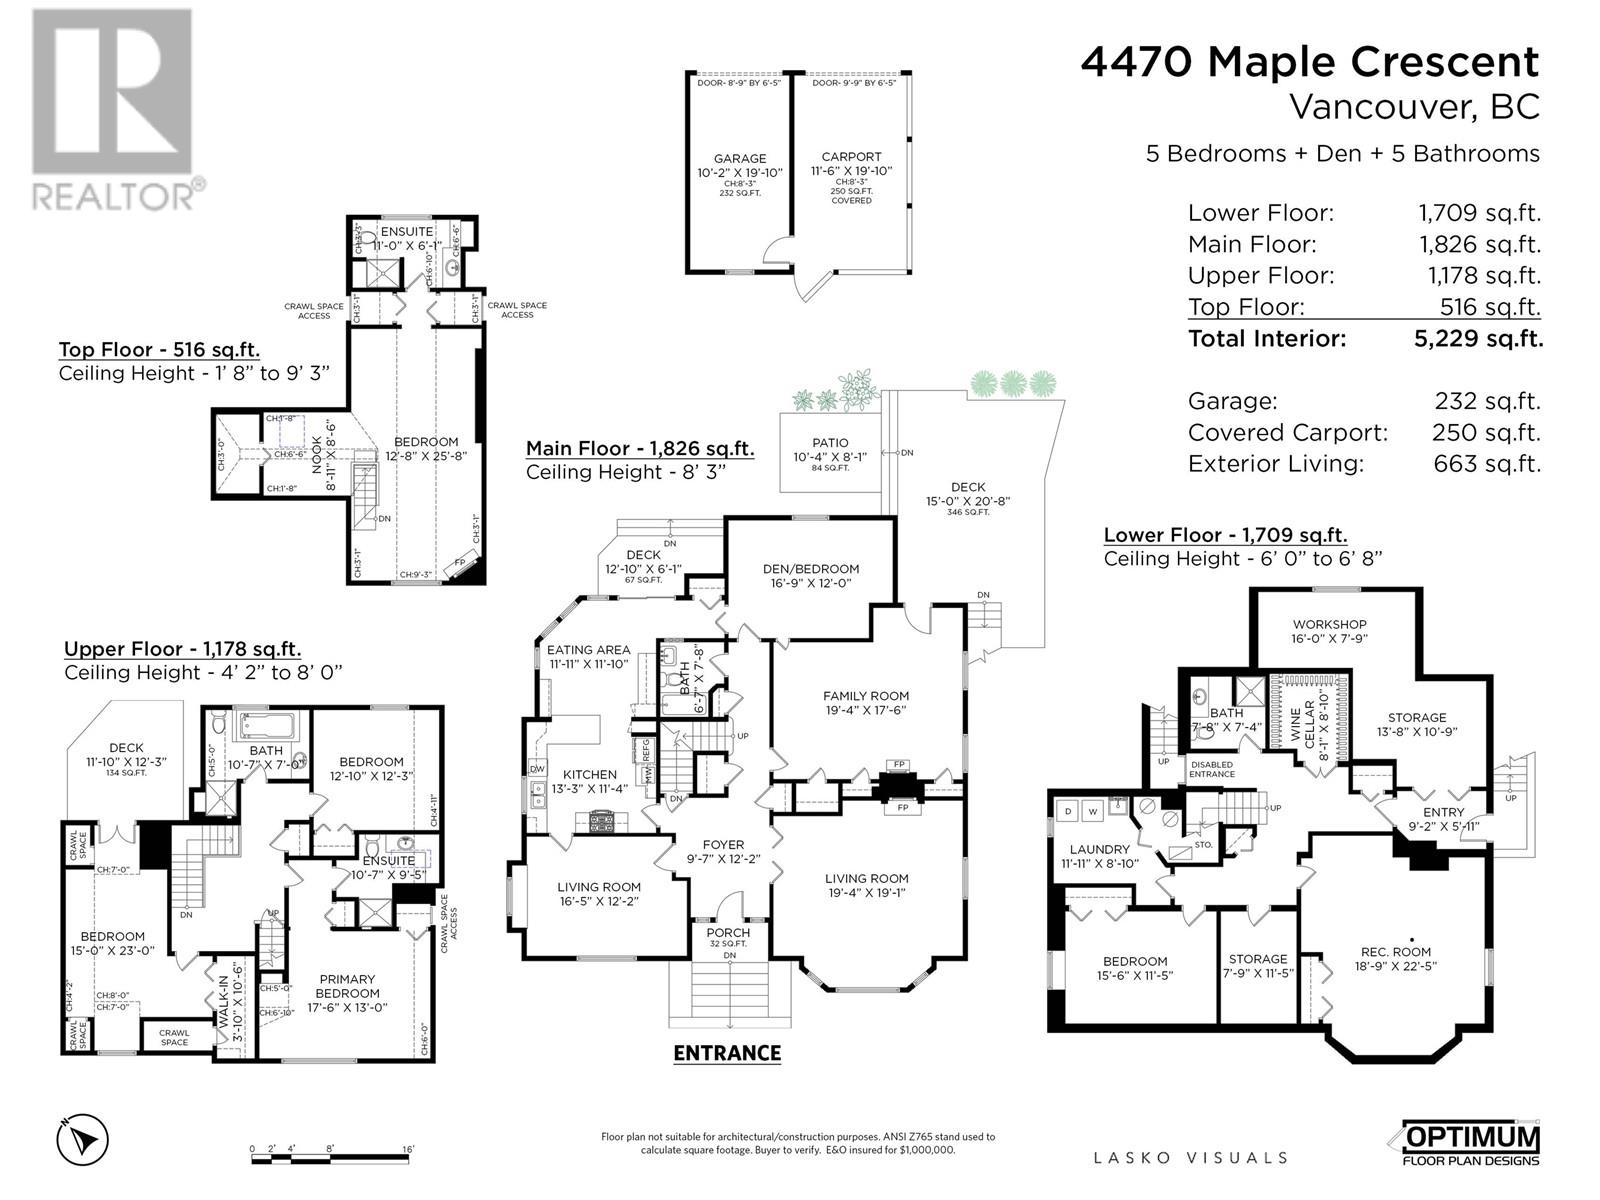 Listing Picture 40 of 40 : 4470 MAPLE CRESCENT, Vancouver / 溫哥華 - 魯藝地產 Yvonne Lu Group - MLS Medallion Club Member